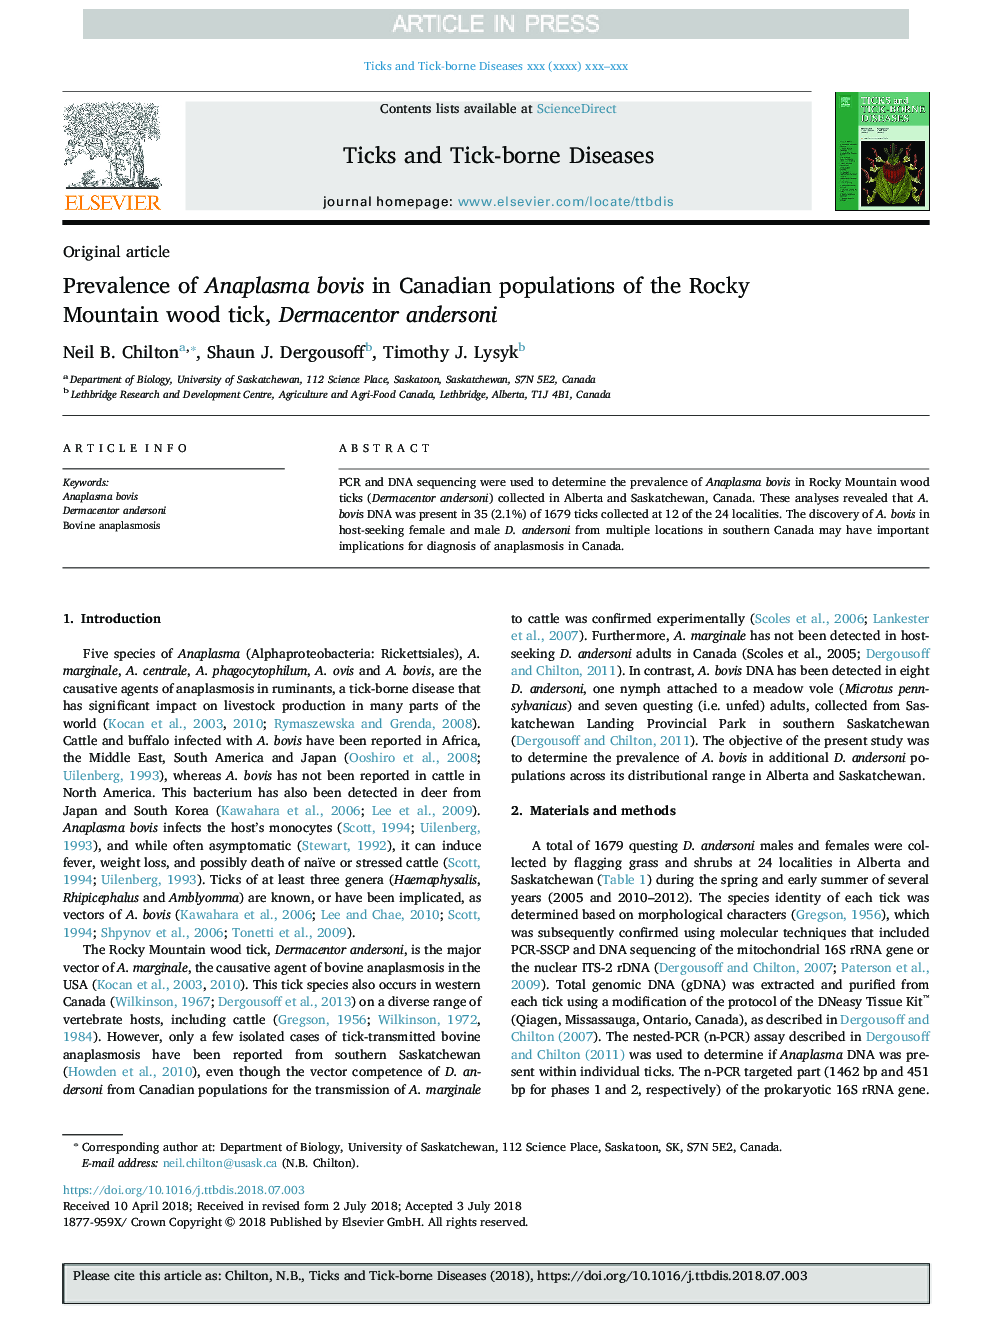 Prevalence of Anaplasma bovis in Canadian populations of the Rocky Mountain wood tick, Dermacentor andersoni